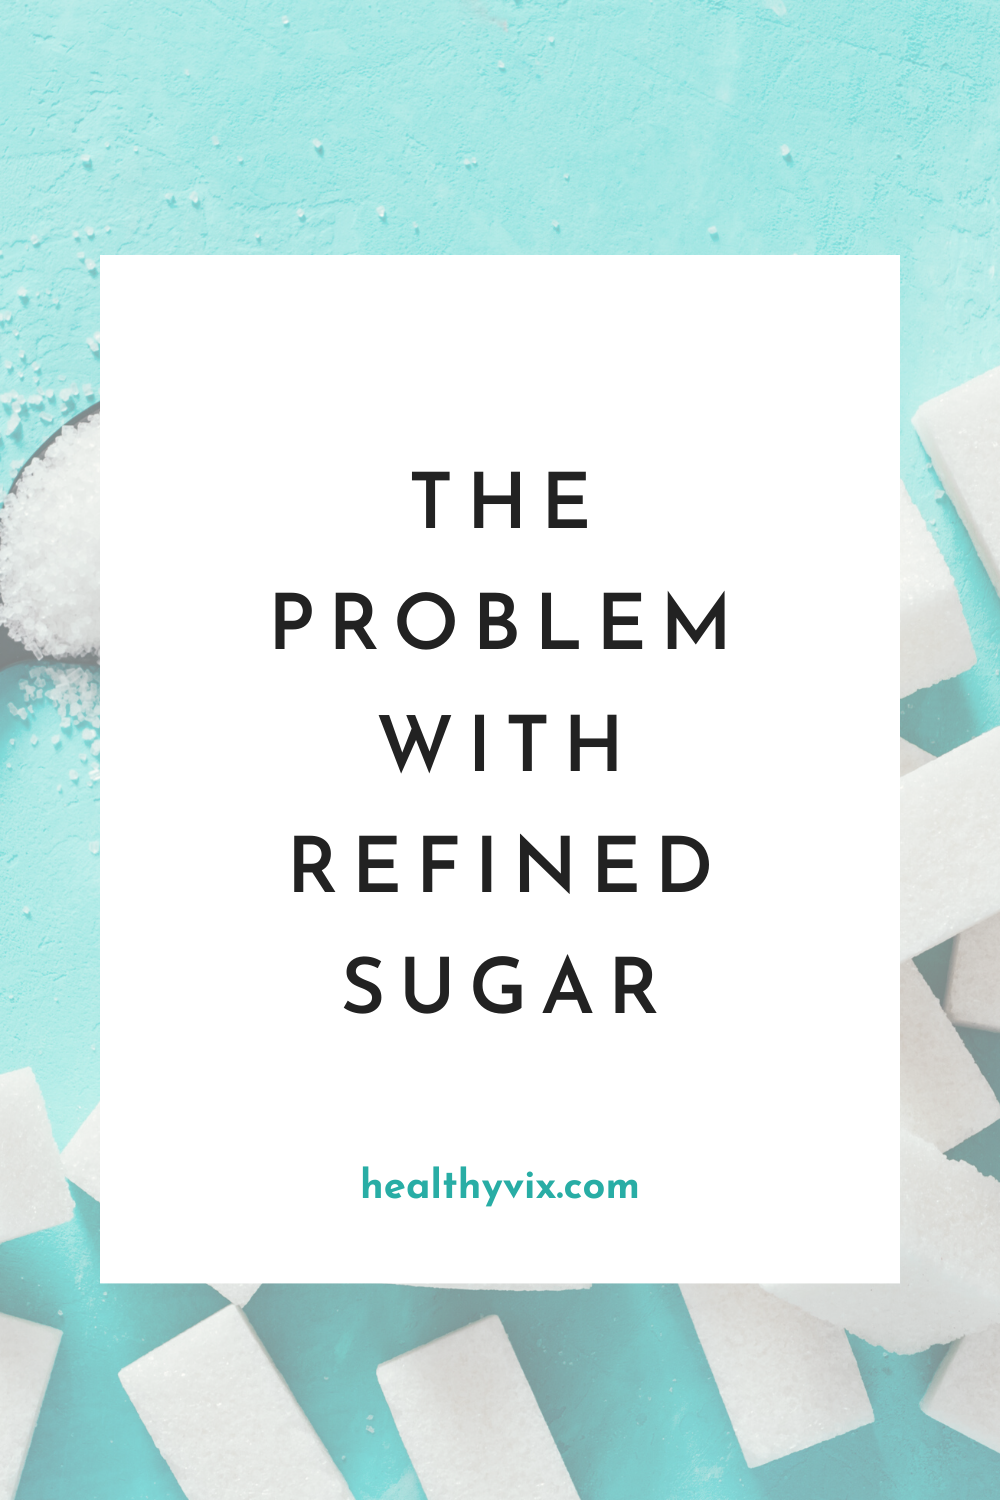 The problem with refined sugar